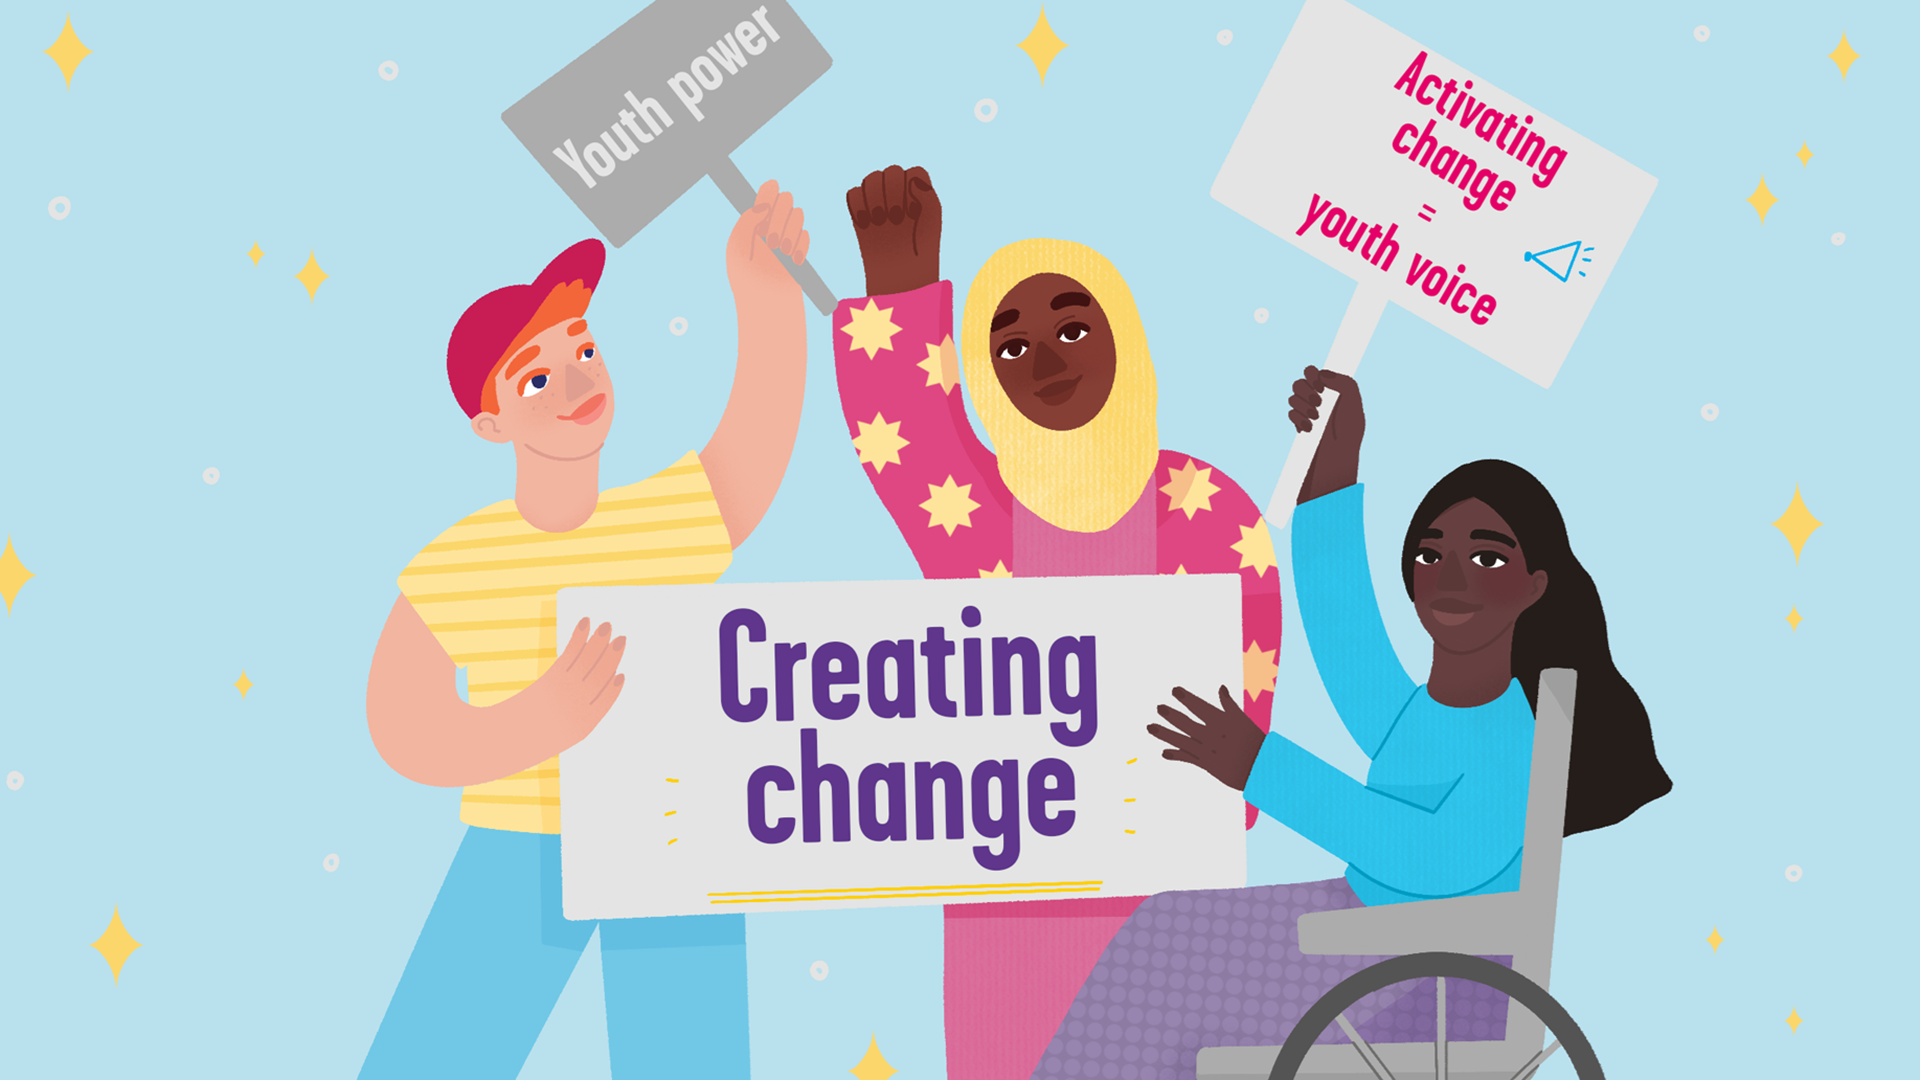 Three people holding a placard which says 'creating change'. The person on the left is holding a small placard 'youth power' with the person on the right in a wheelchair holding a placard 'activating change = youth voice'